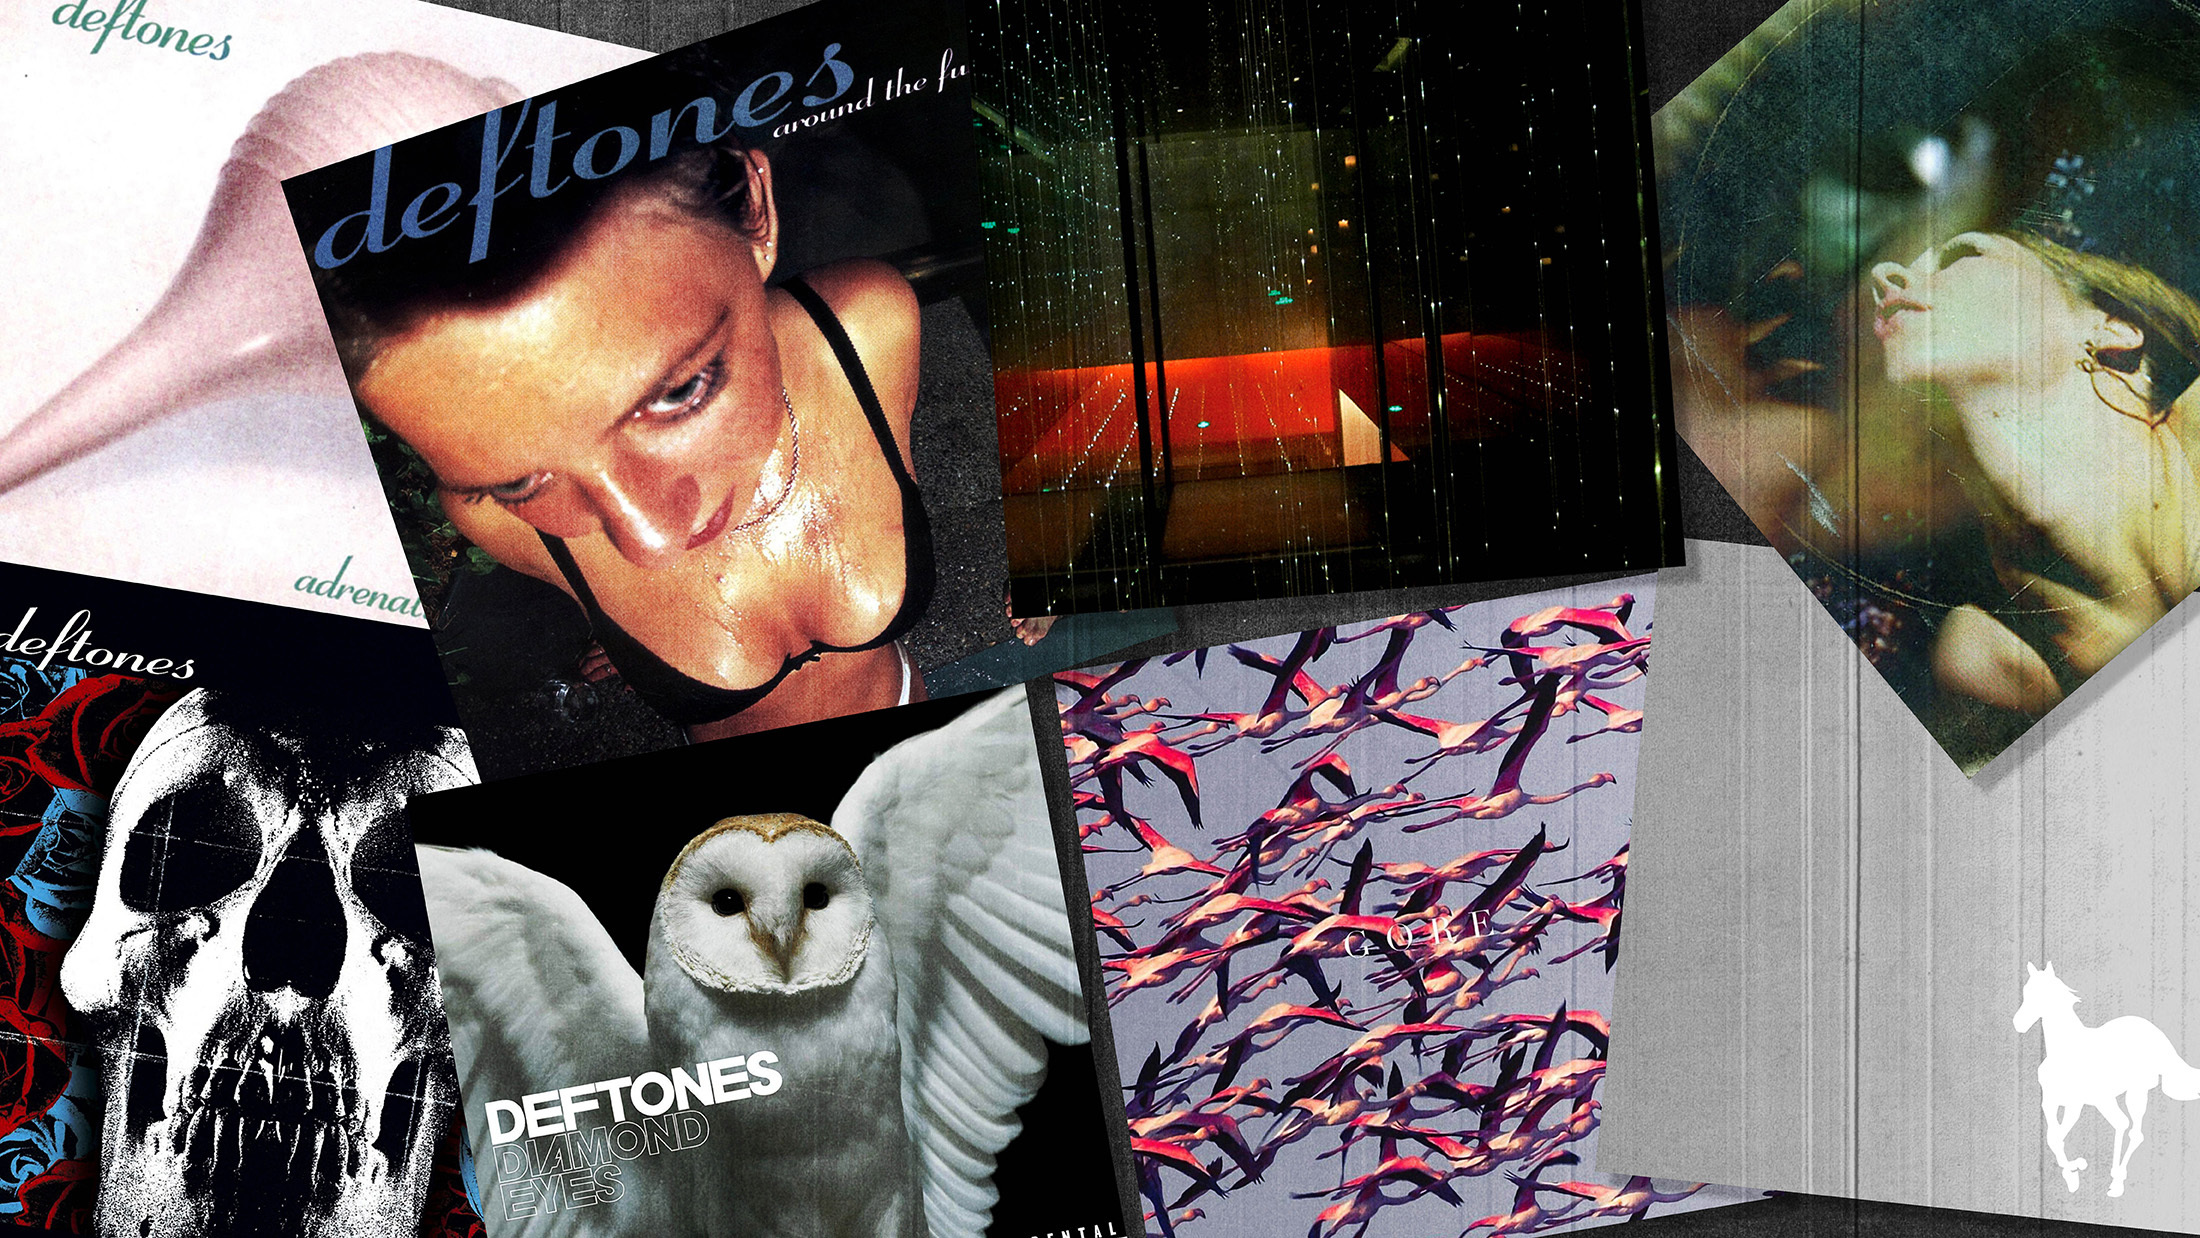 A popular metal band called Deftones has released a number of excellent albums